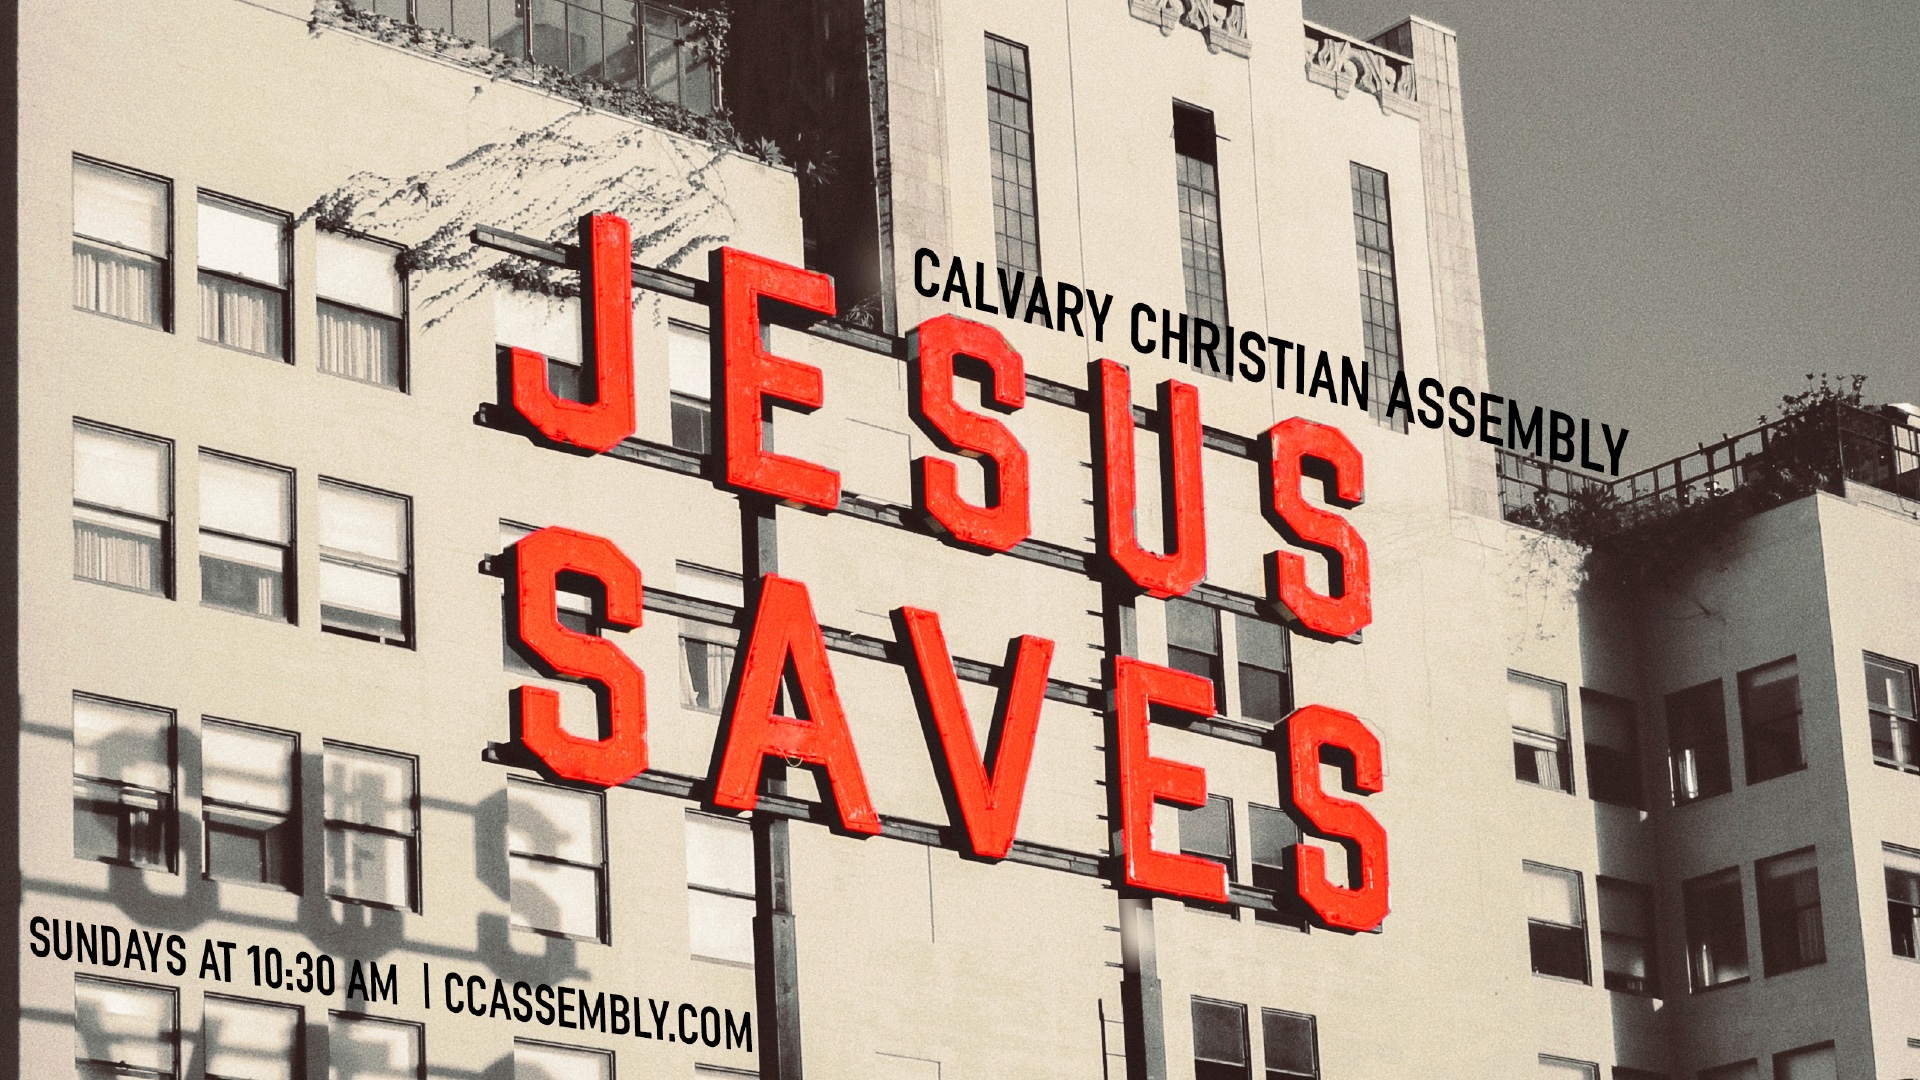 Jesus Saves: Three Biblical Reasons to Go “There”